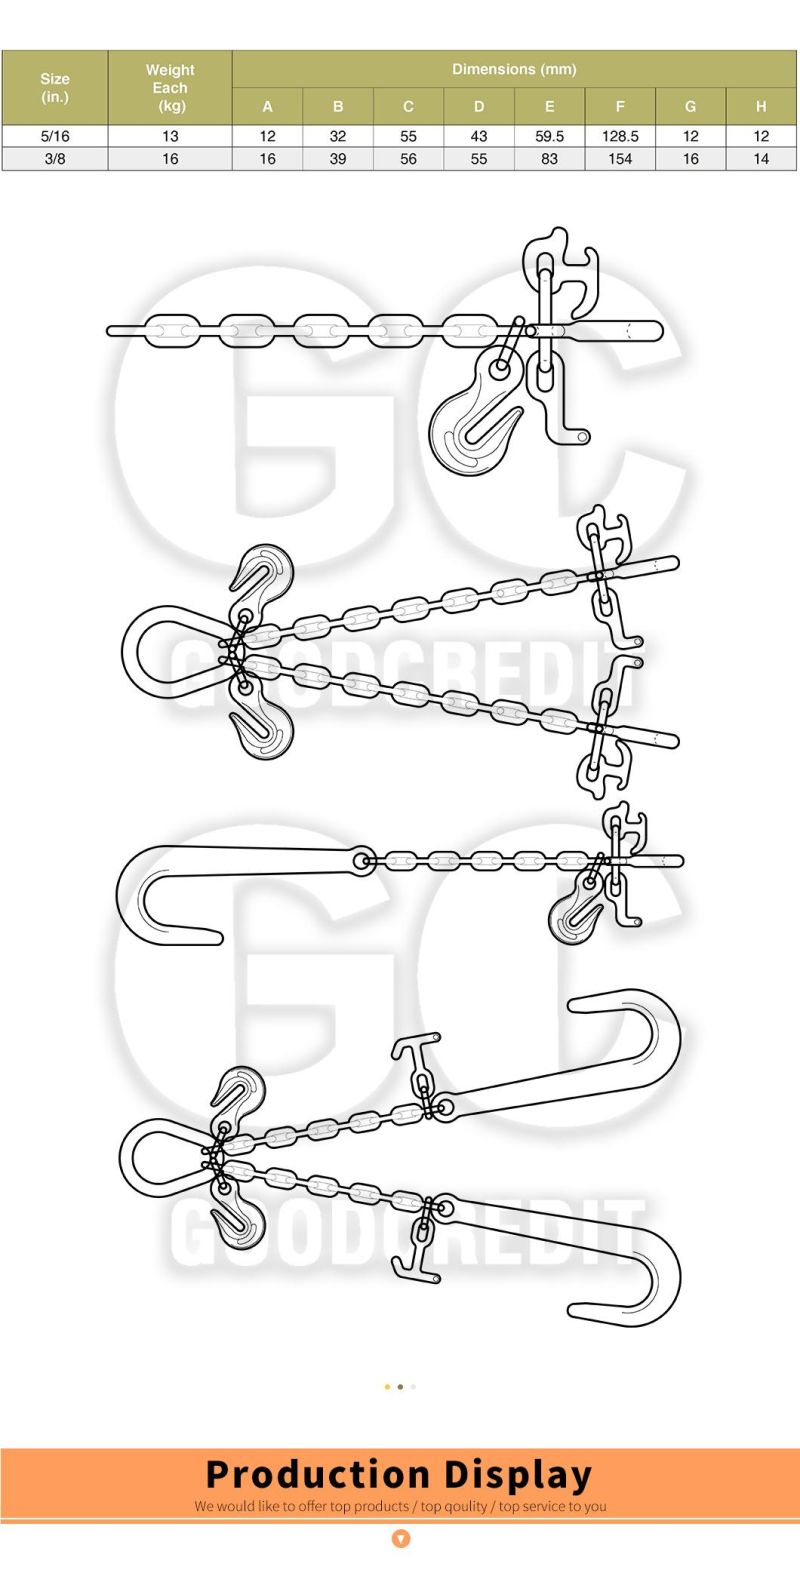 G70 Forged Ratchet Type Load Binder Chain